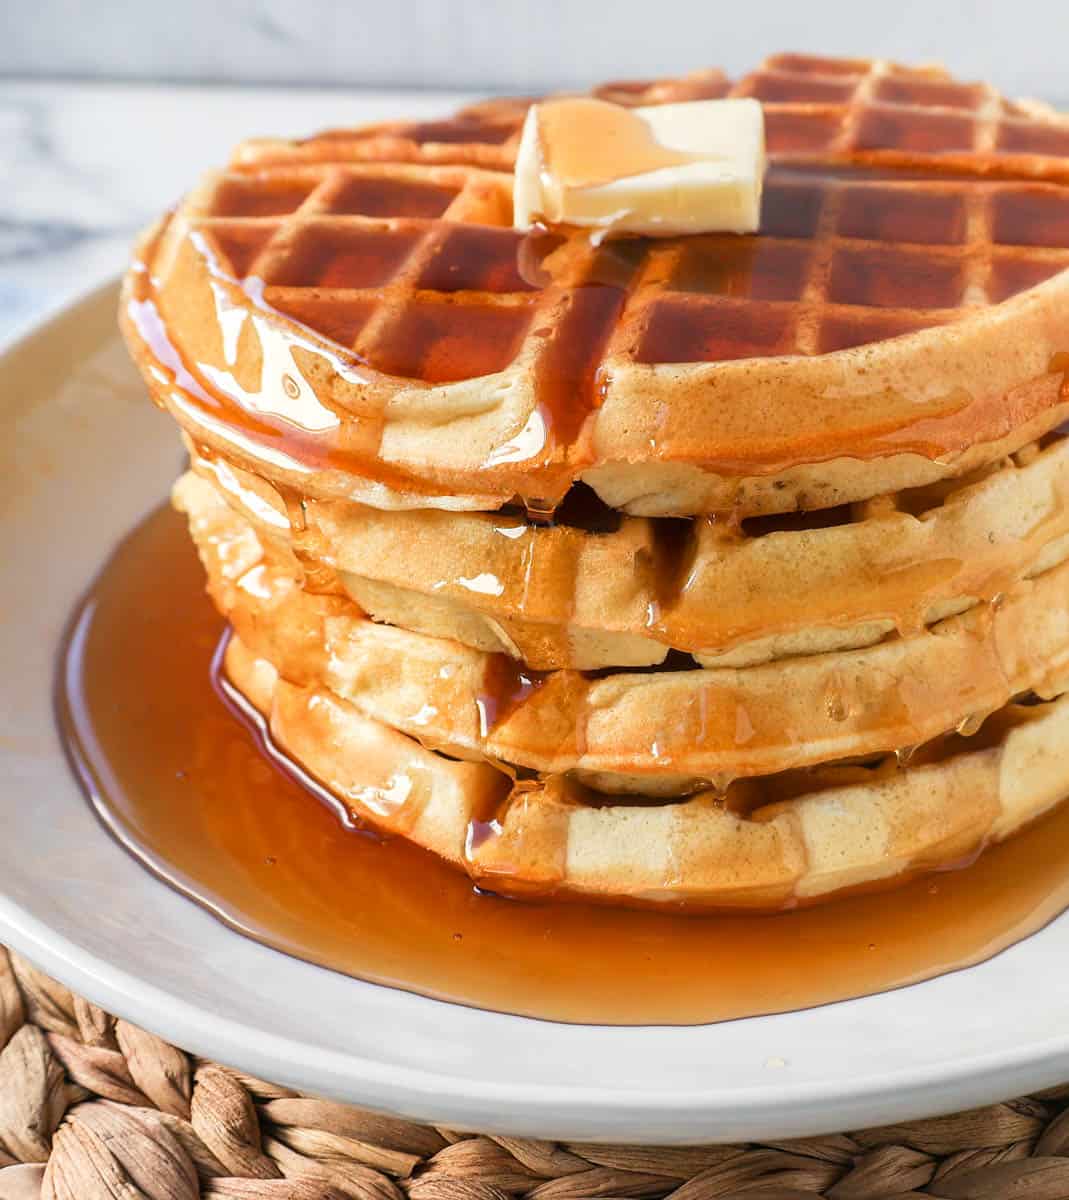 Buttermilk Waffles. How to make the best homemade Belgian waffles at home. Buttermilk waffles with crispy edges and chewy centers make the perfect weekend breakfast!